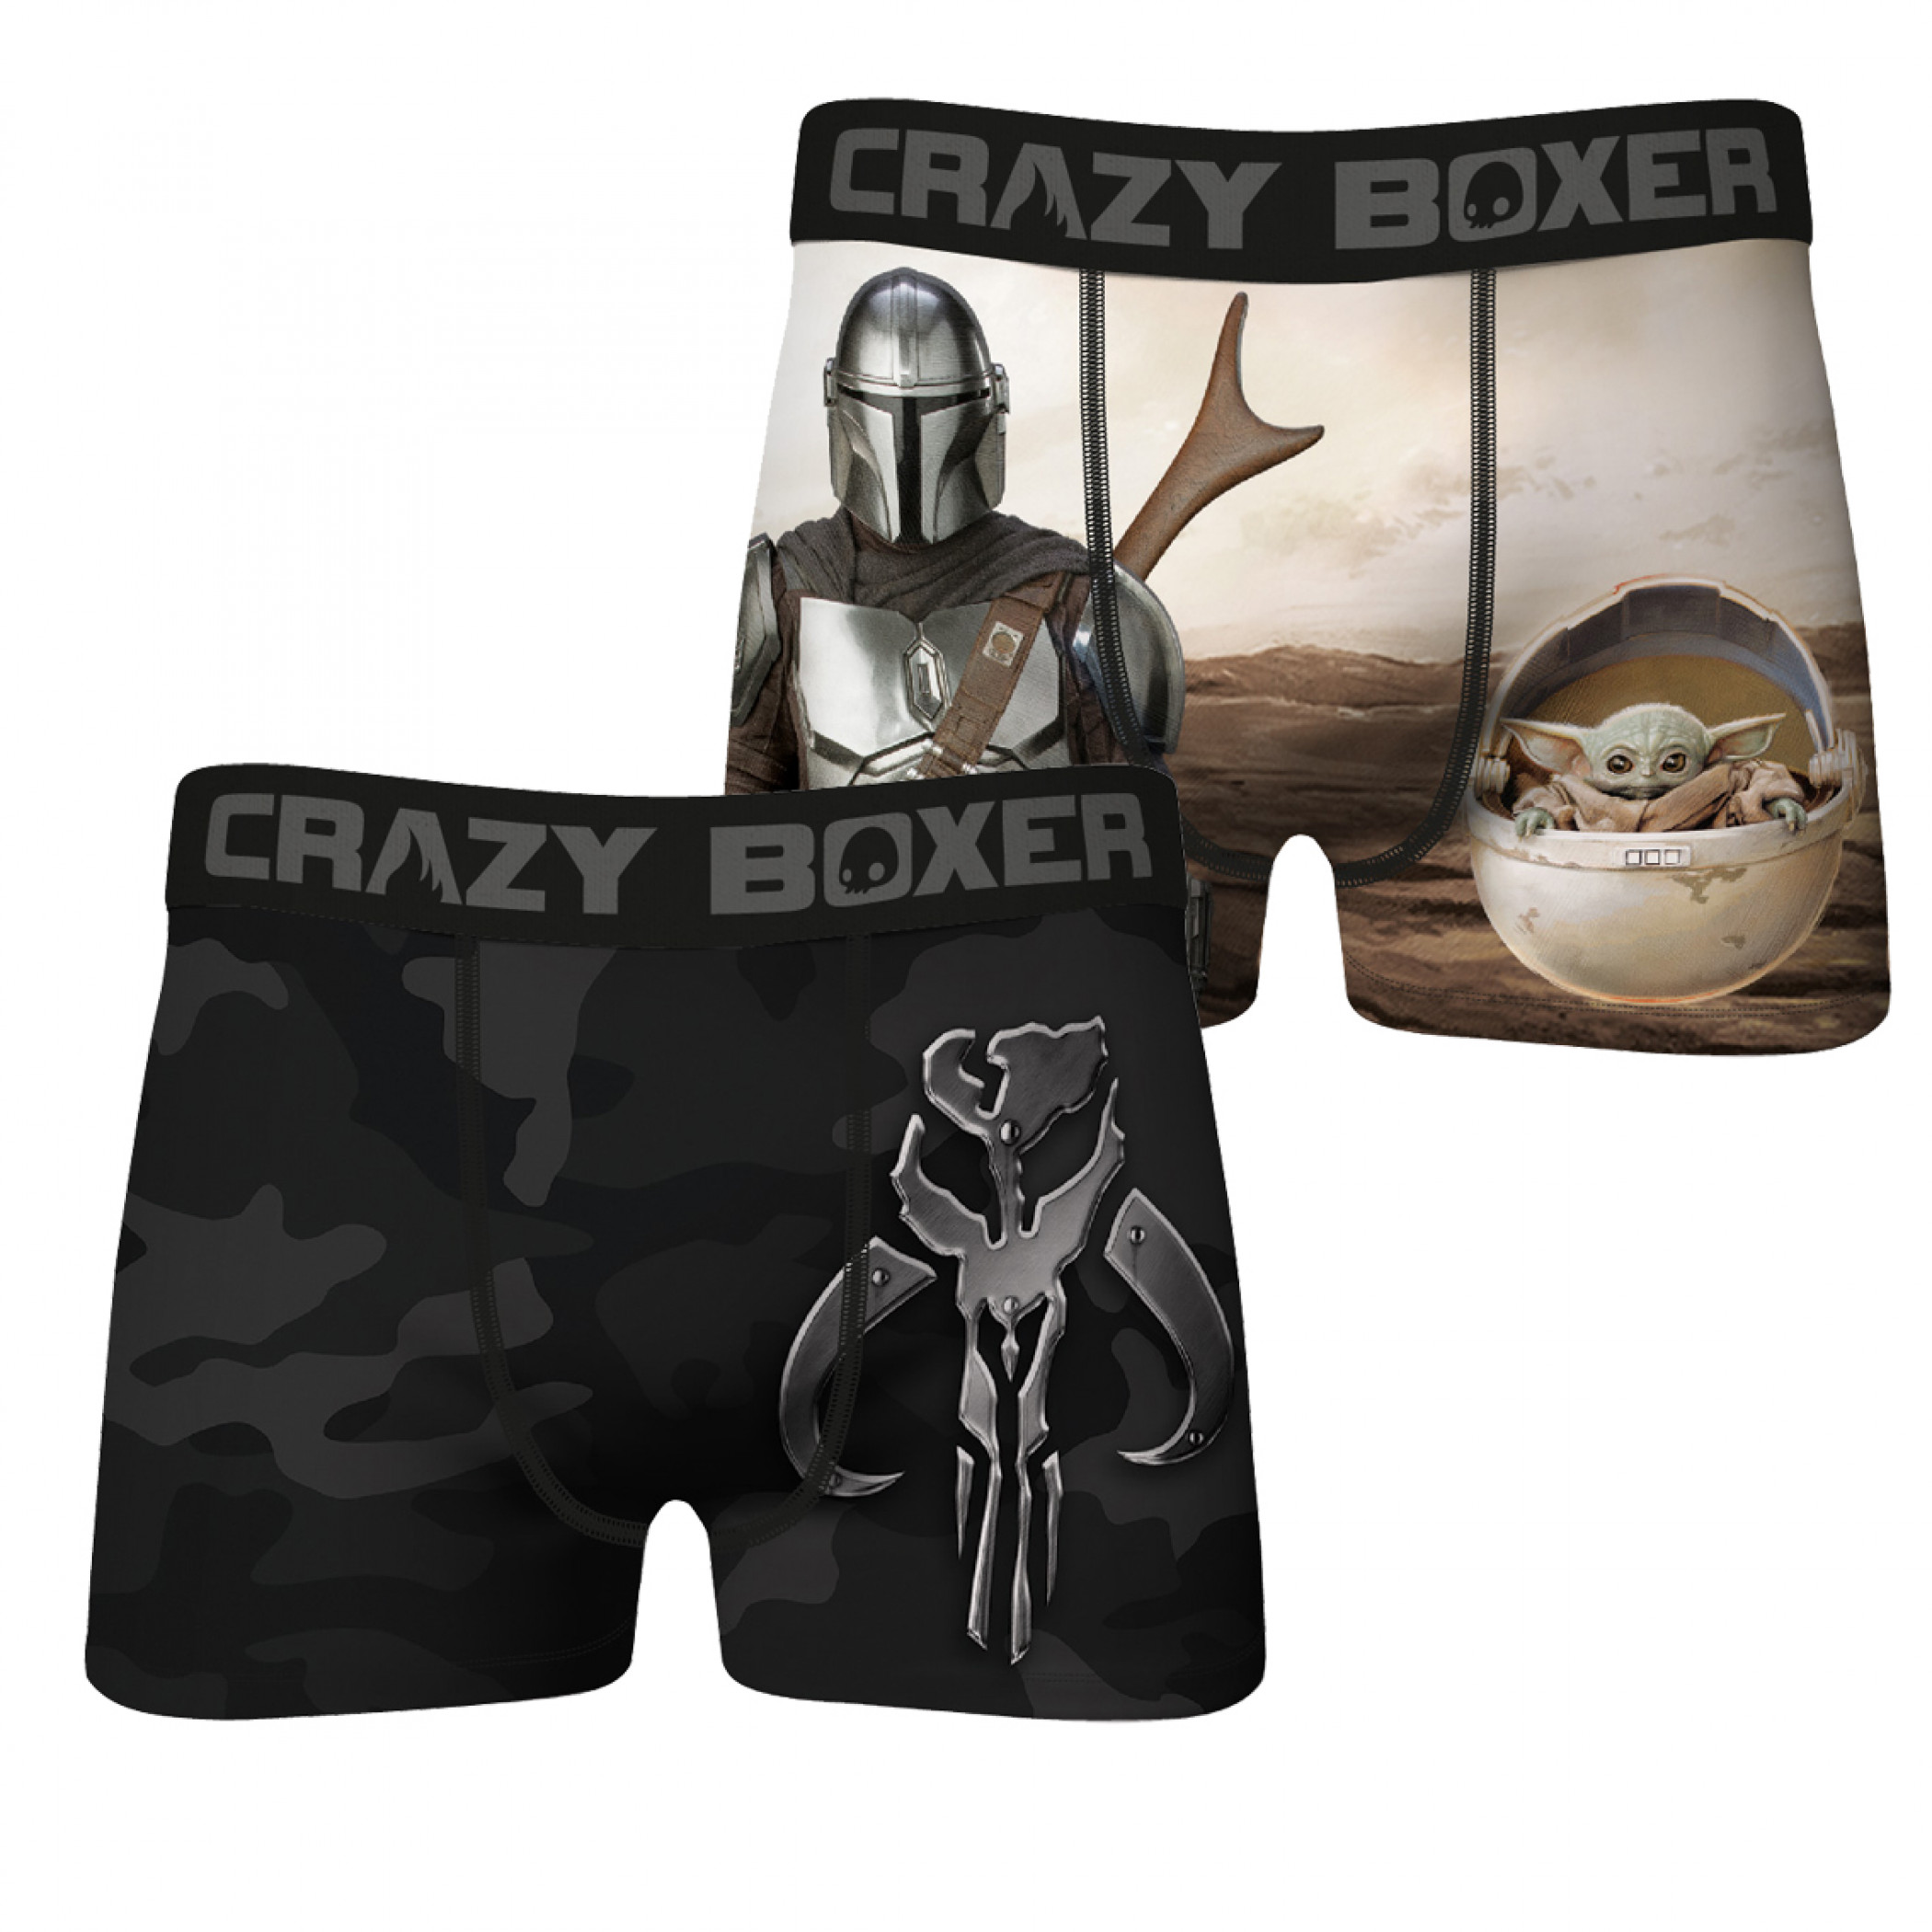 Star Wars The Mandalorian Symbol and The Child Waltzing Up 2-Pack of Crazy Boxer Briefs